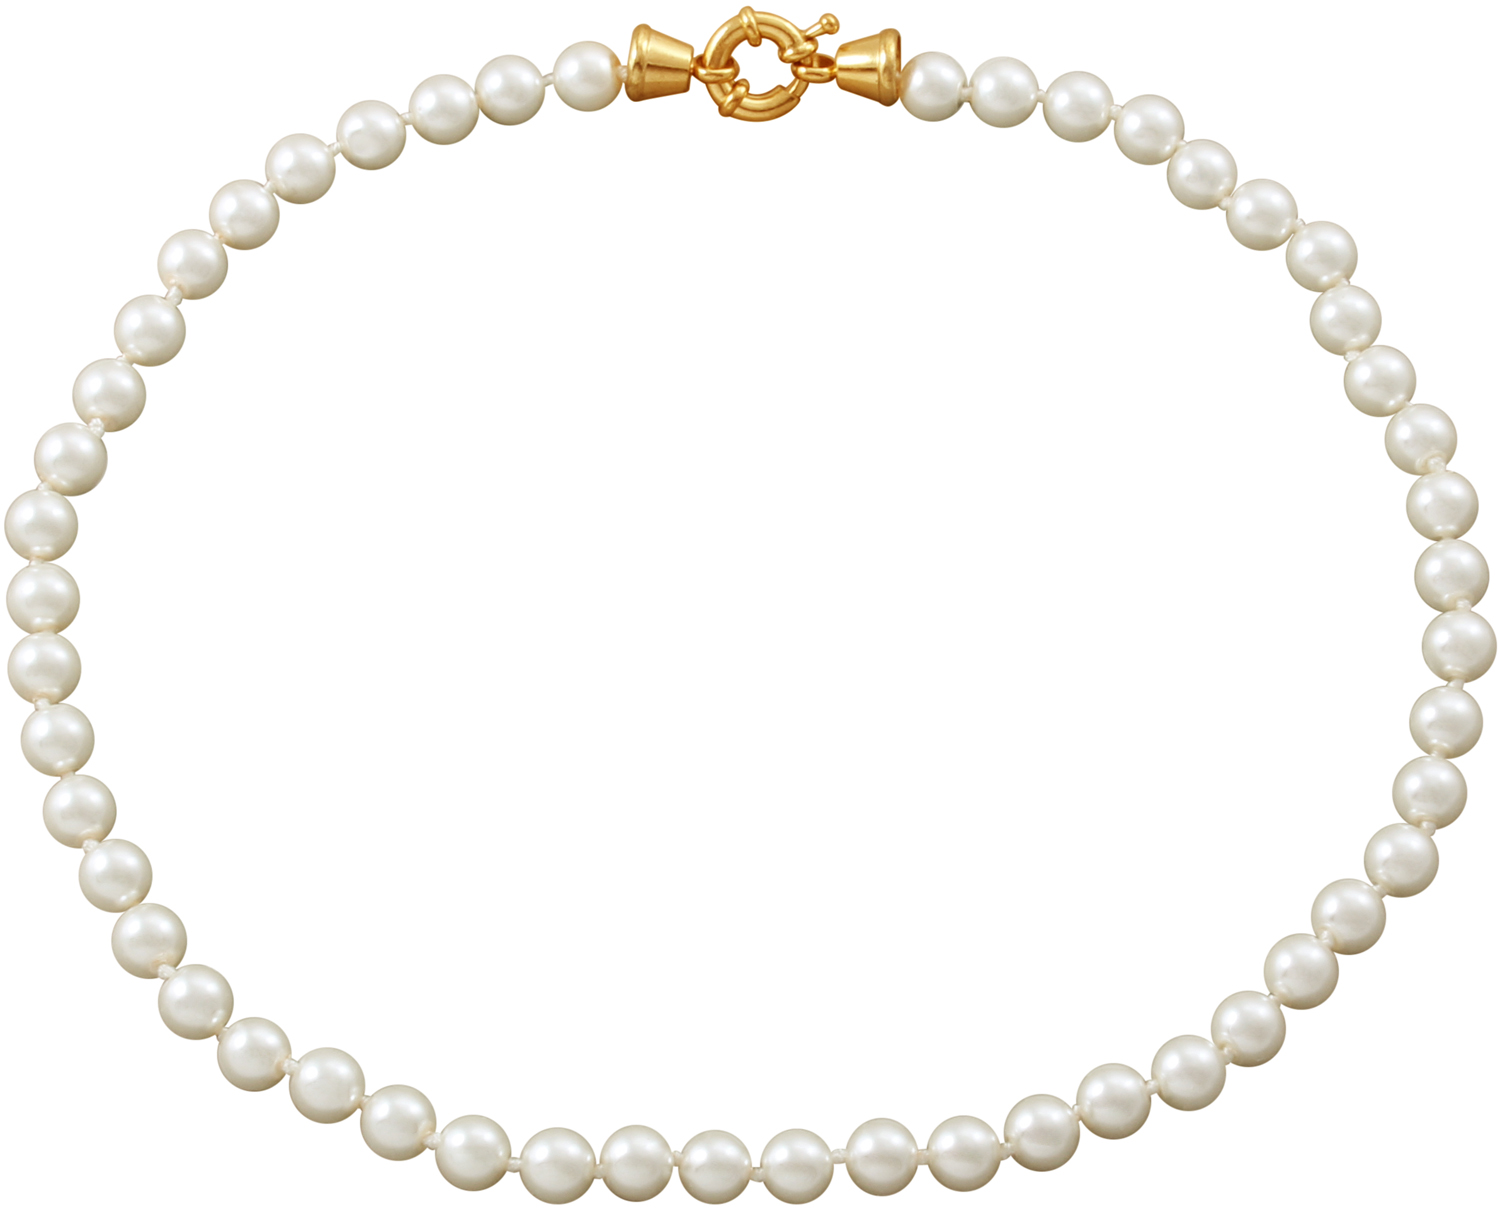 Necklace - Pearls